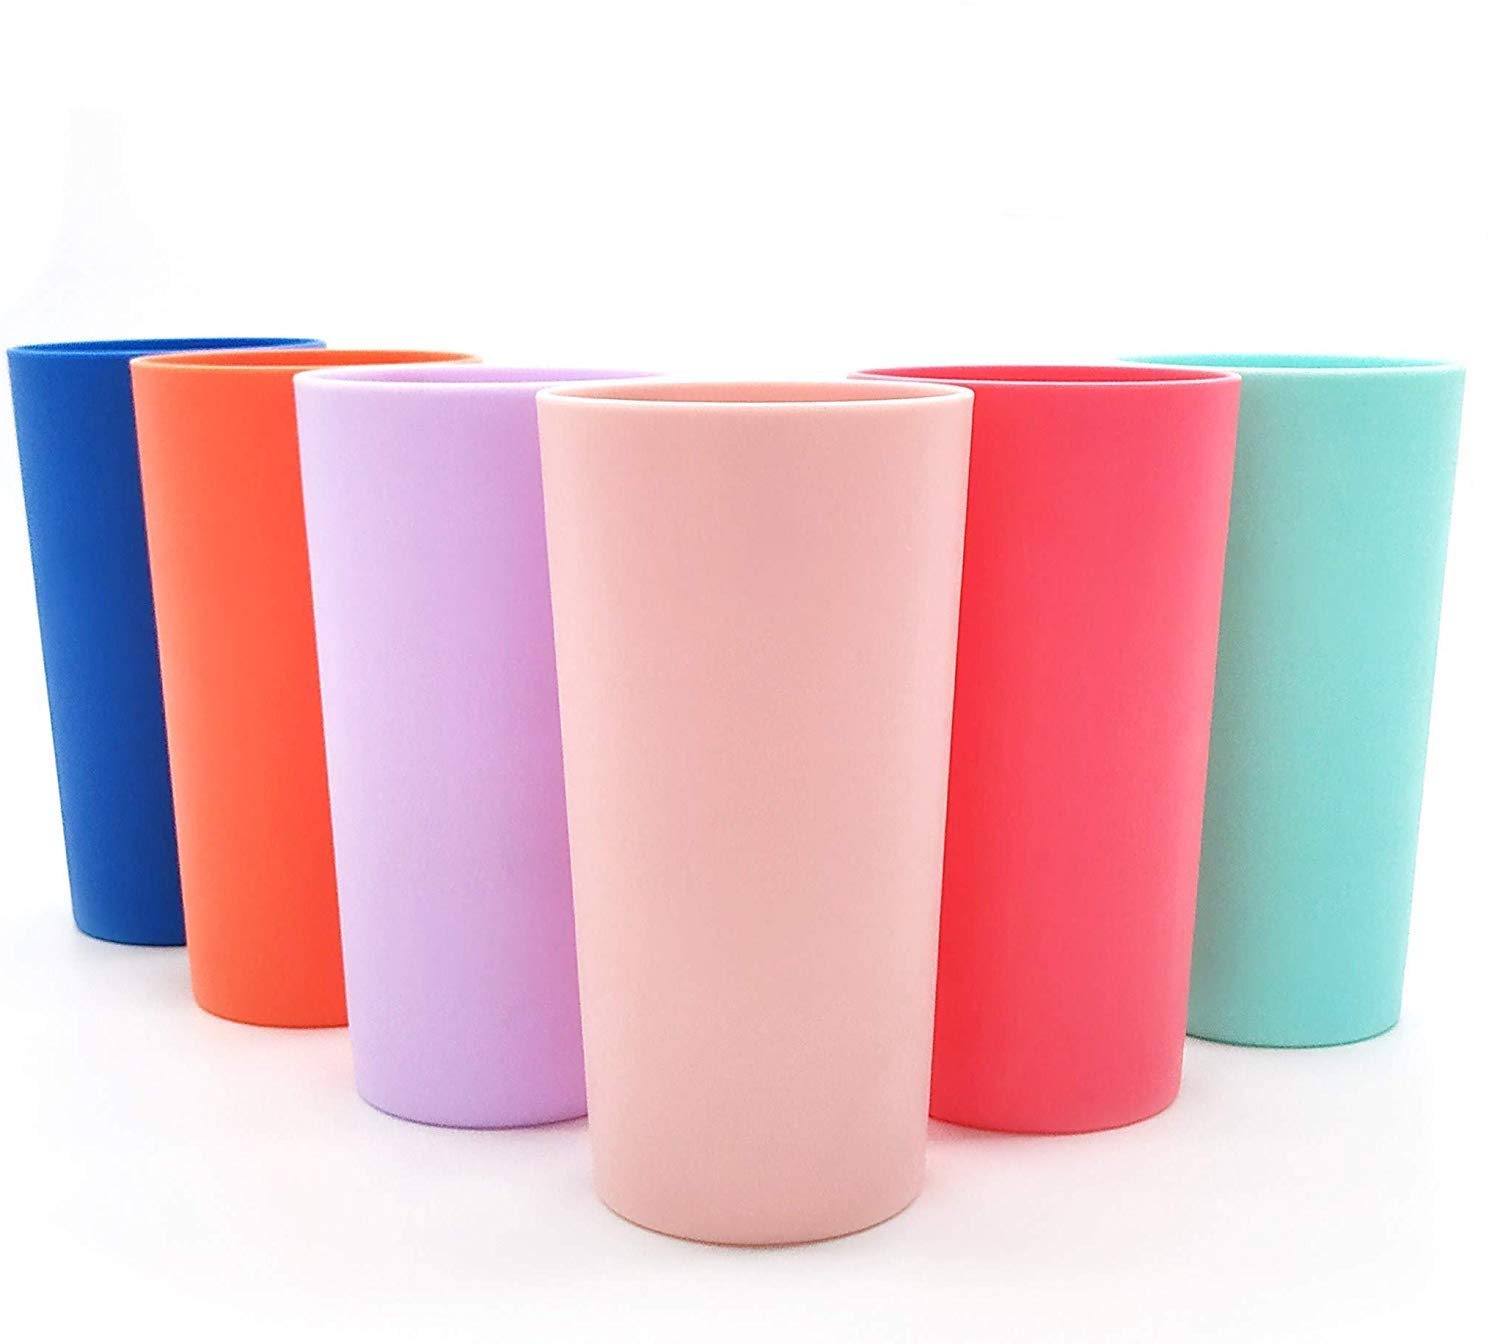 Acrylic Drinking Glasses Set Reusable Drink Tumblers Unbreakable